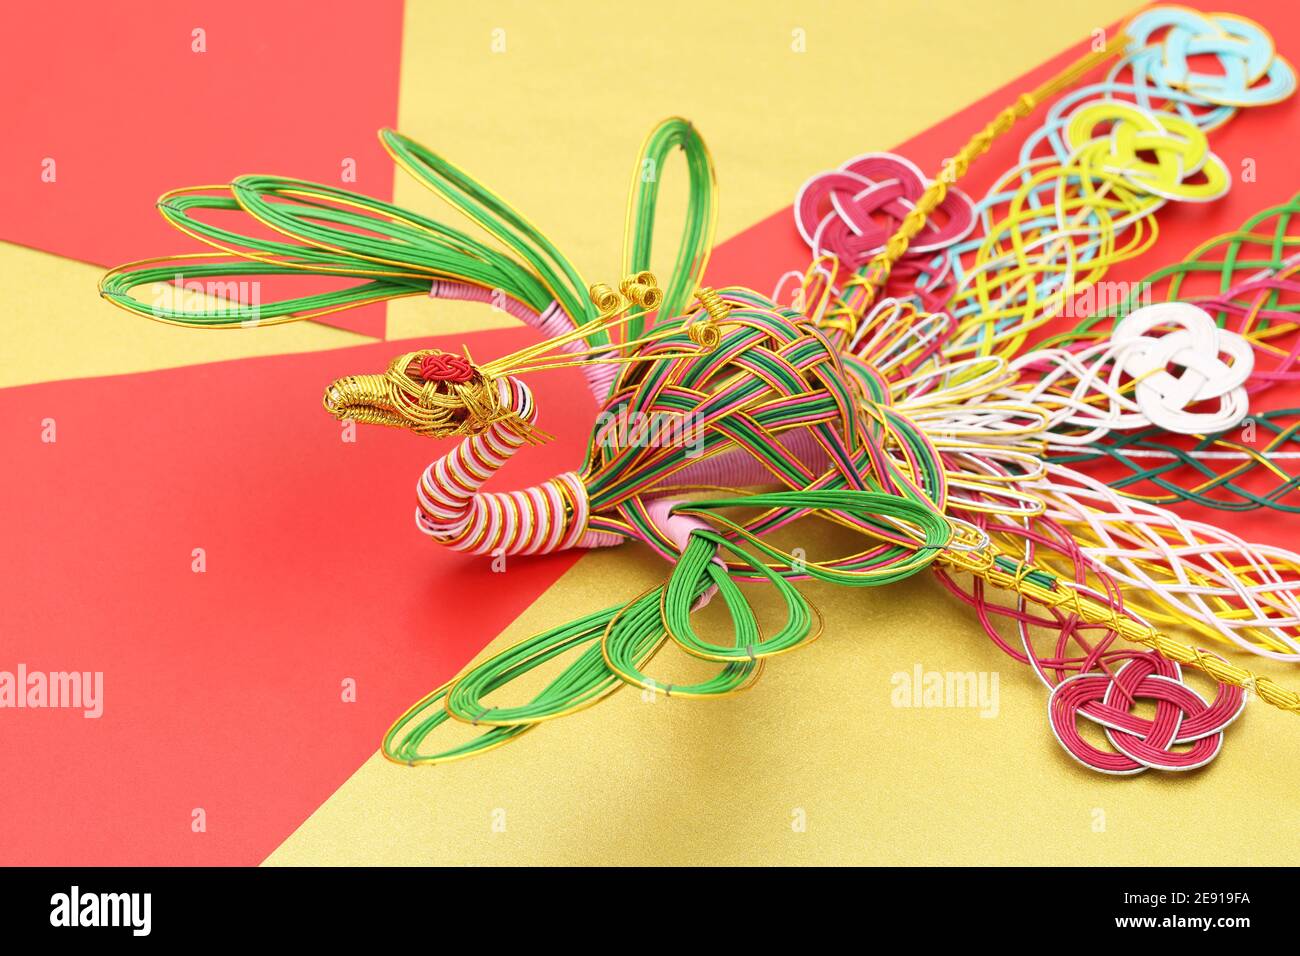 https://c8.alamy.com/comp/2E919FA/mizuhiki-by-japanese-culture-phoenix-bird-is-decorative-japanese-cord-made-from-twisted-paper-2E919FA.jpg